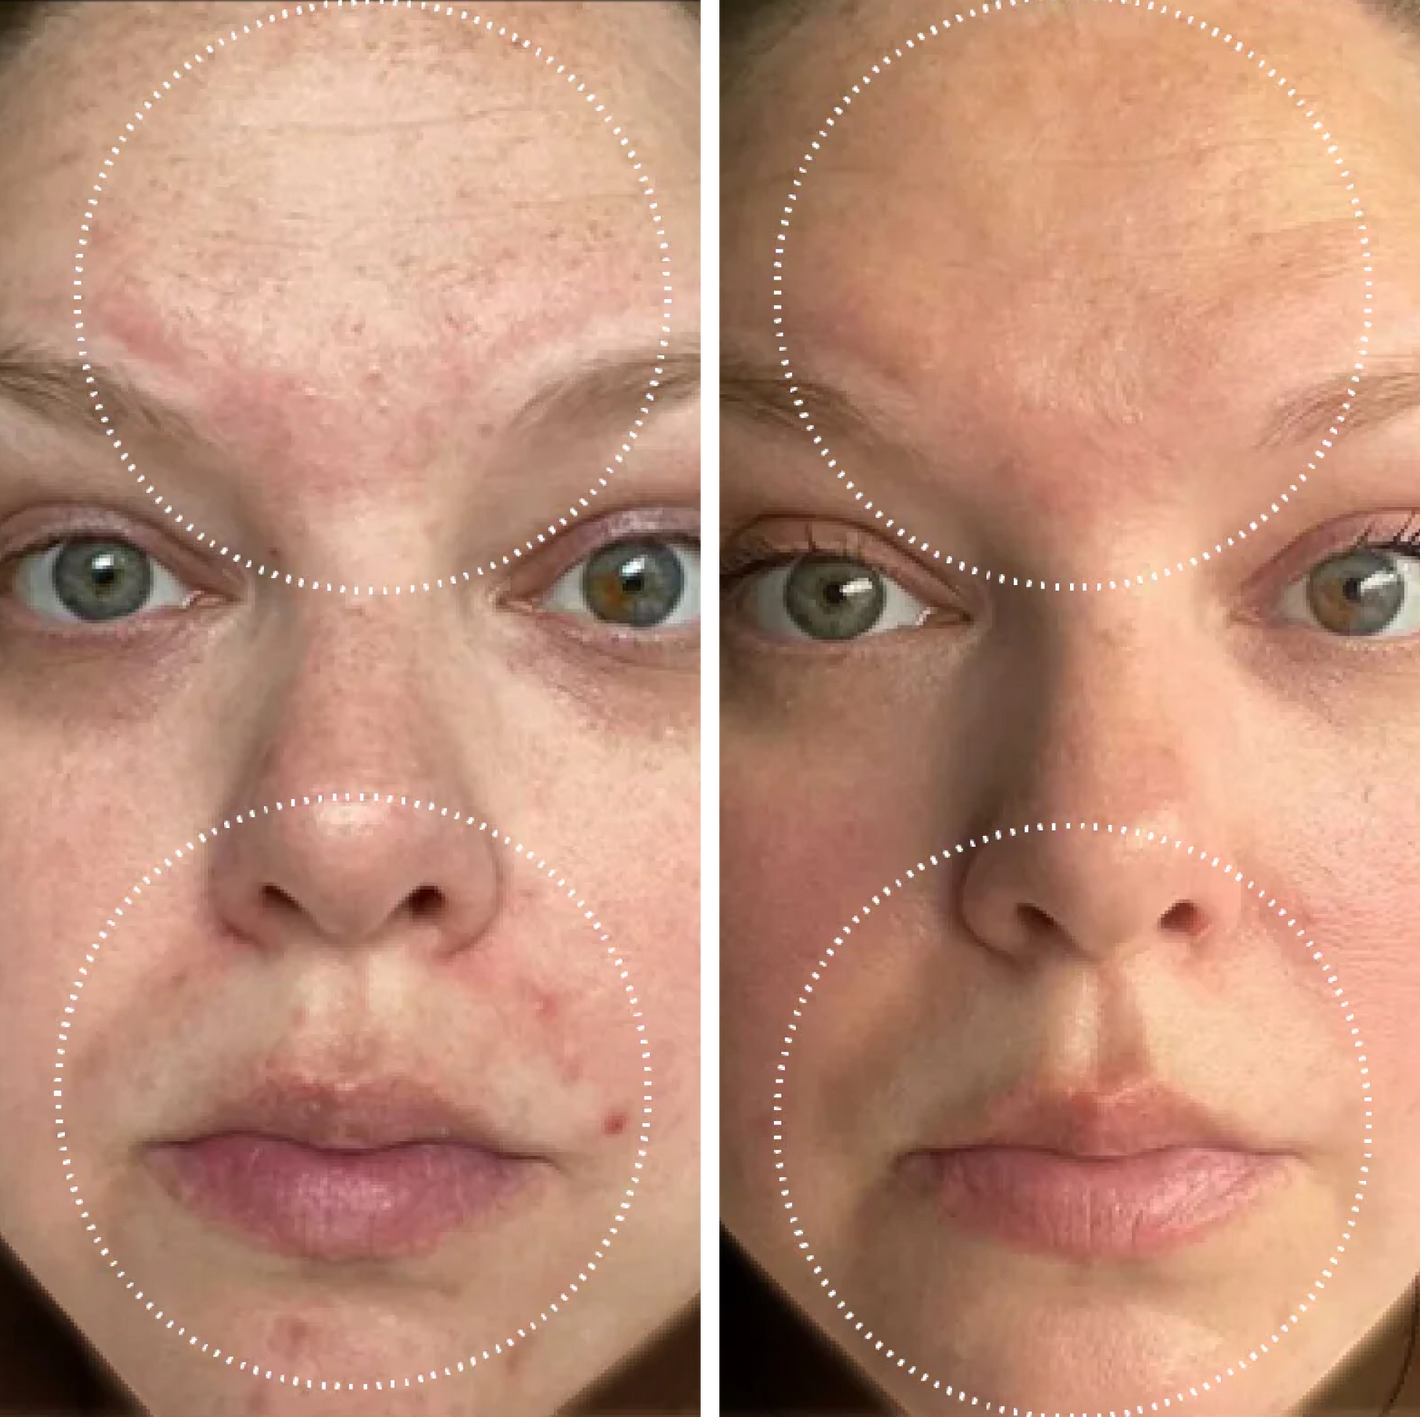 Two side by side images of a female-presenting person showing skin before and after 2 weeks use of Droplette Glycolic Illuminator + Retinol Renewer